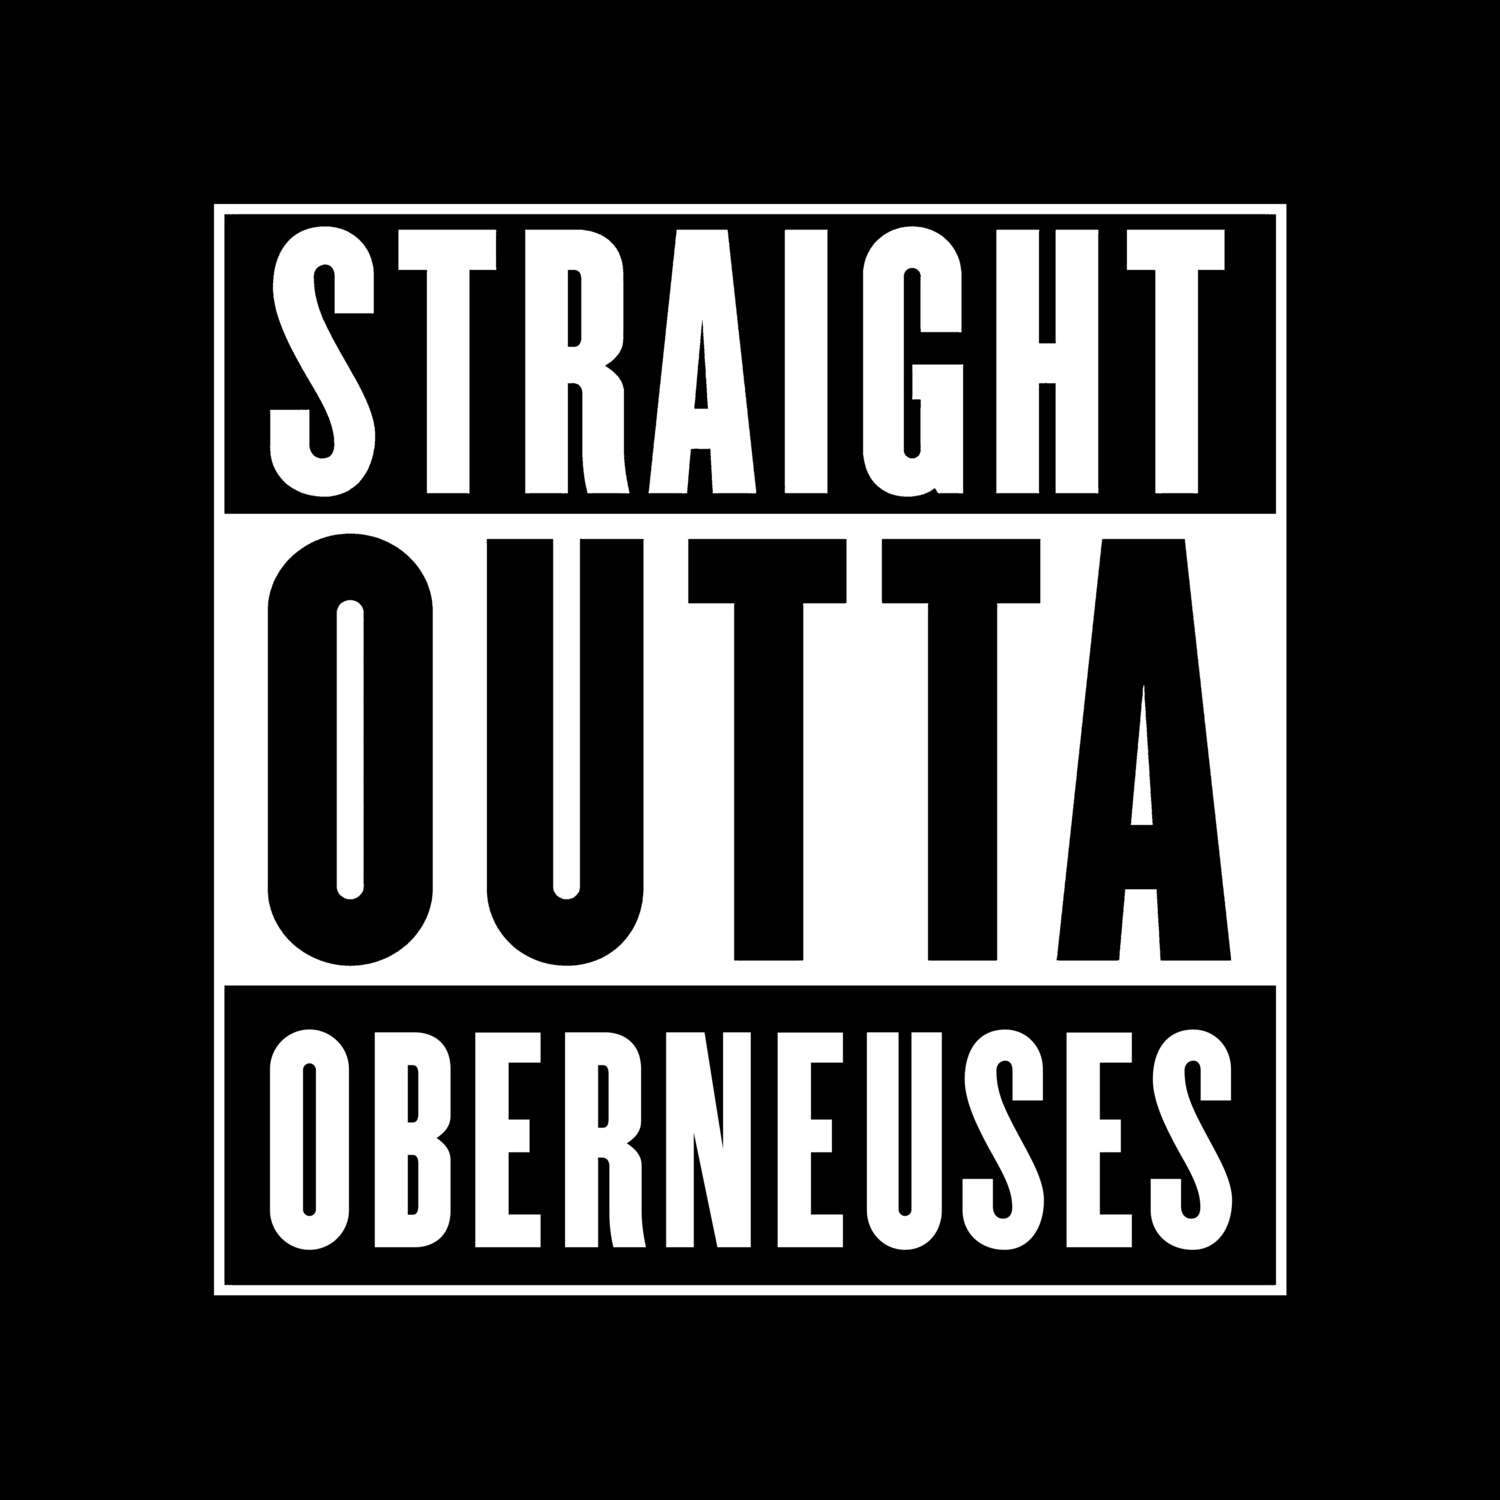 Oberneuses T-Shirt »Straight Outta«